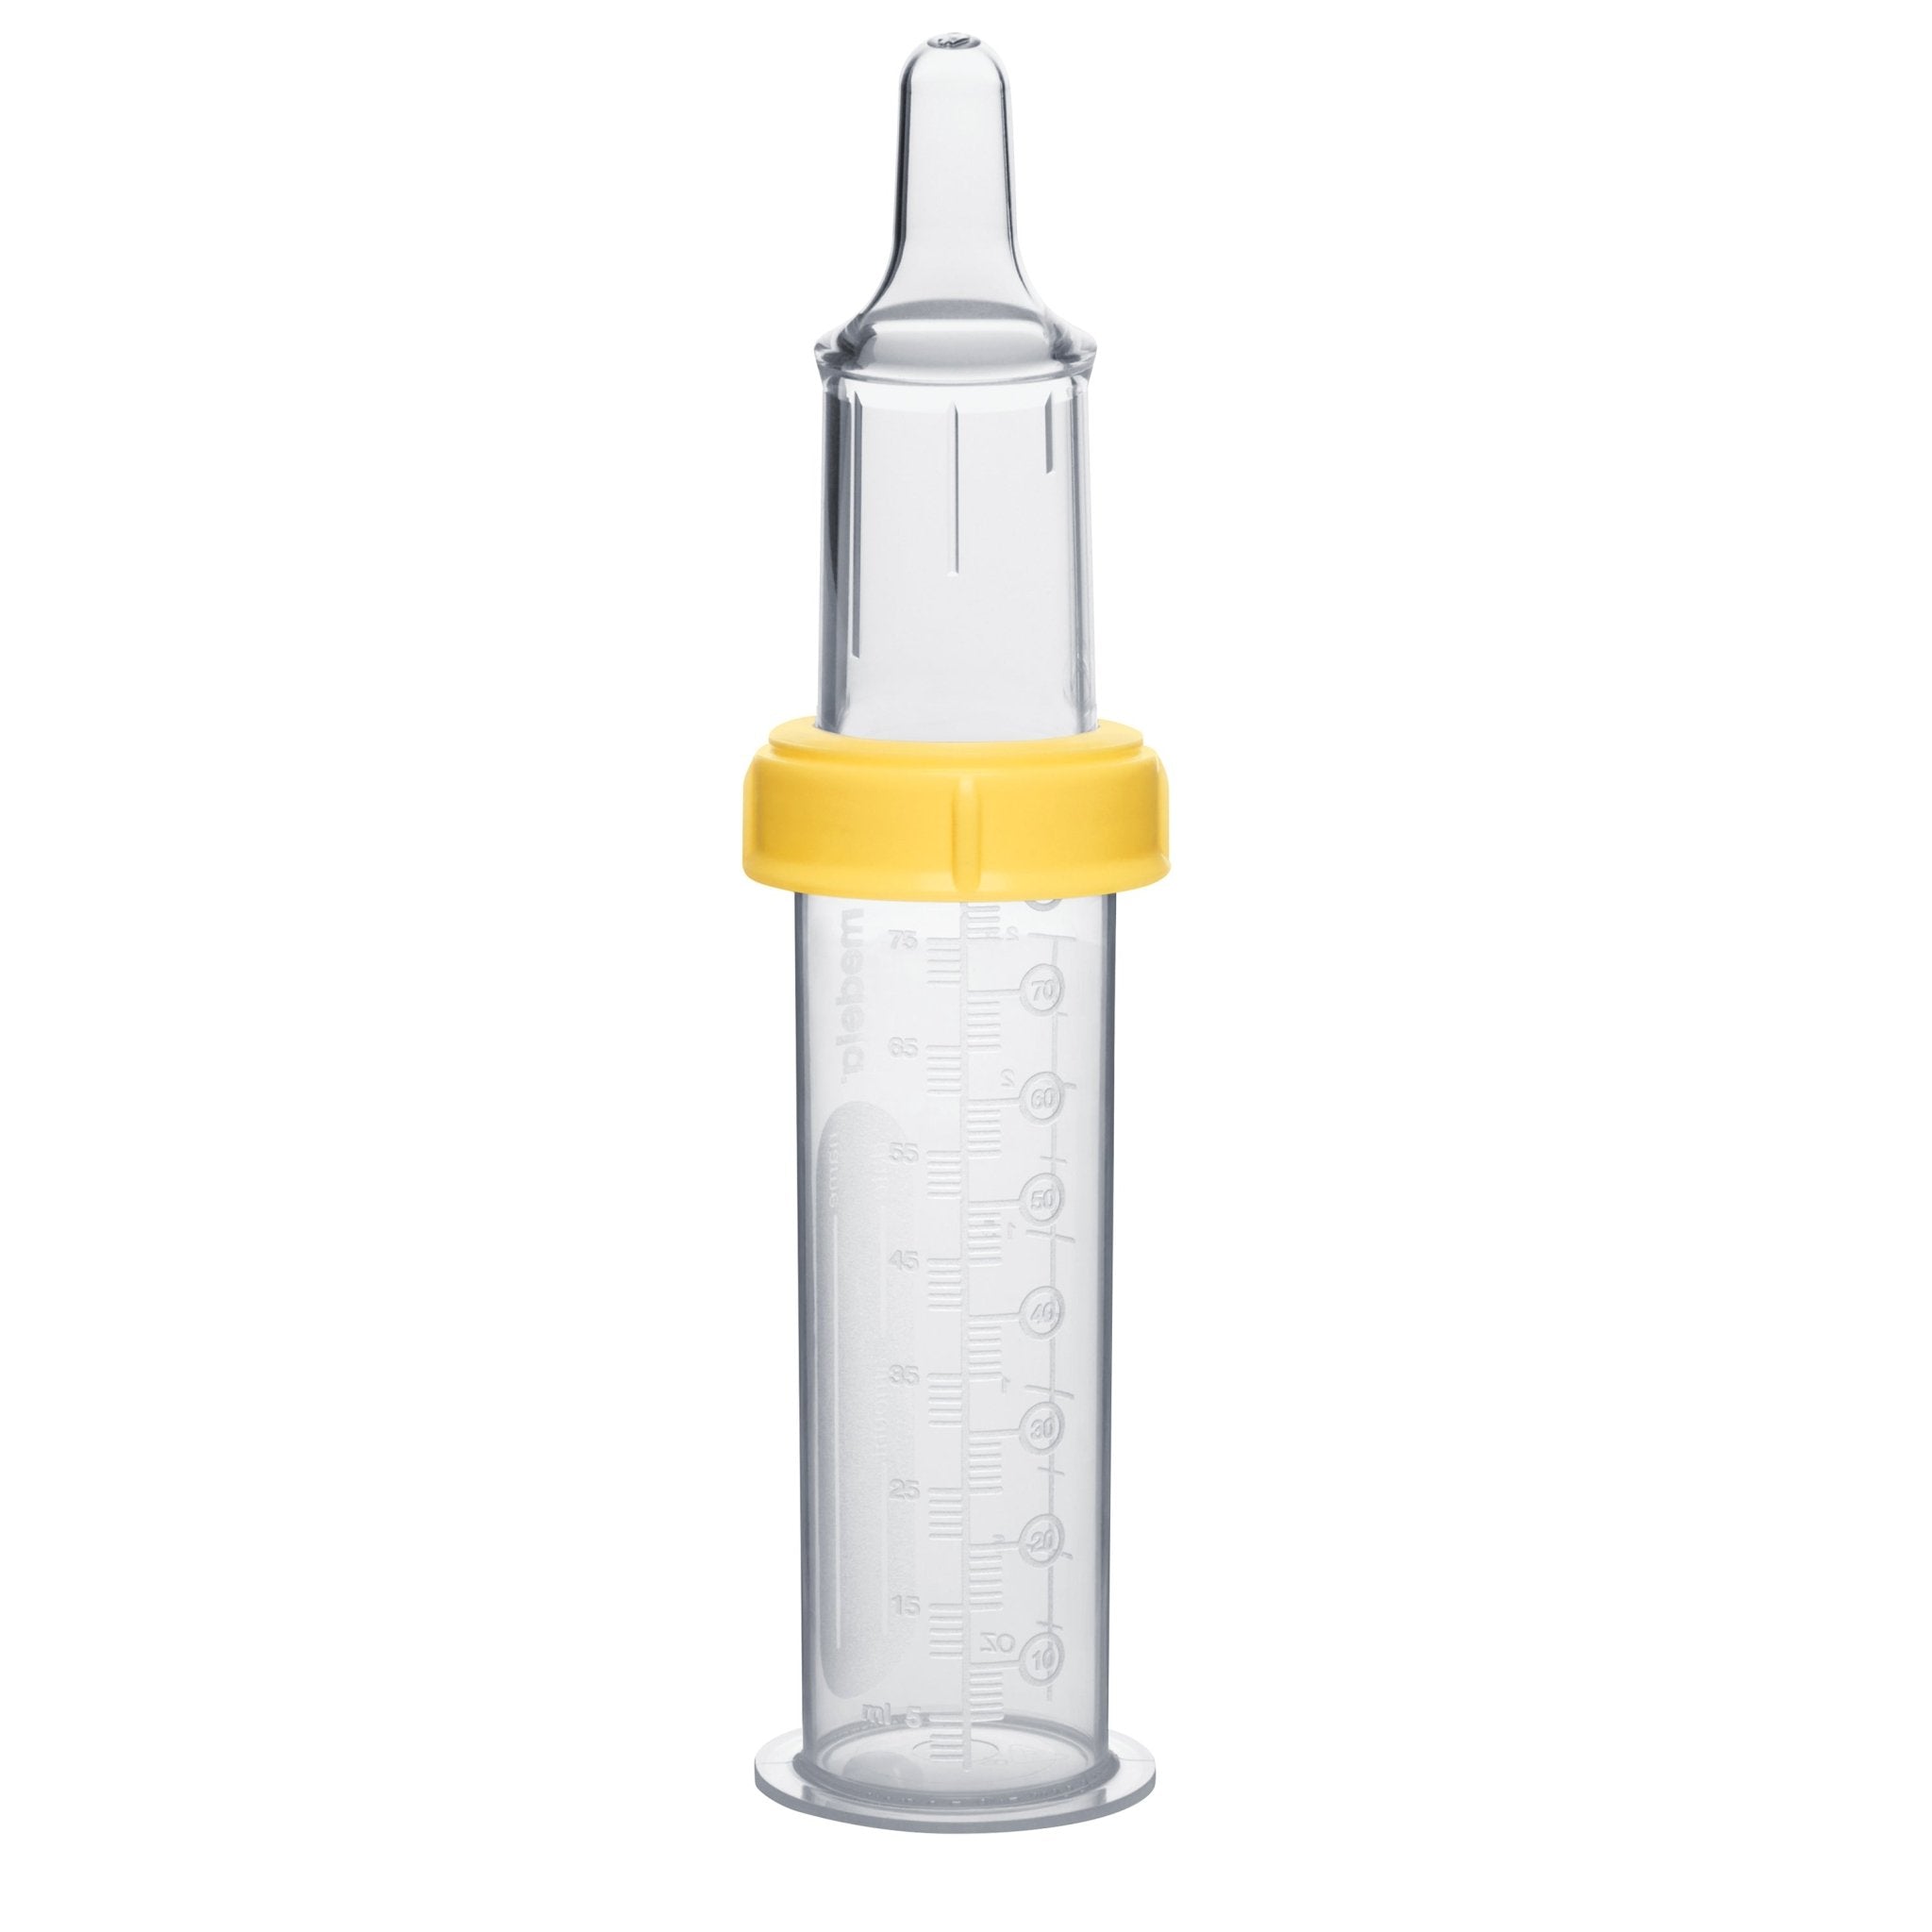 Medela SpecialNeeds Feeder with 80 mL Collection Container, Sterile - ANB Baby -$20 - $50